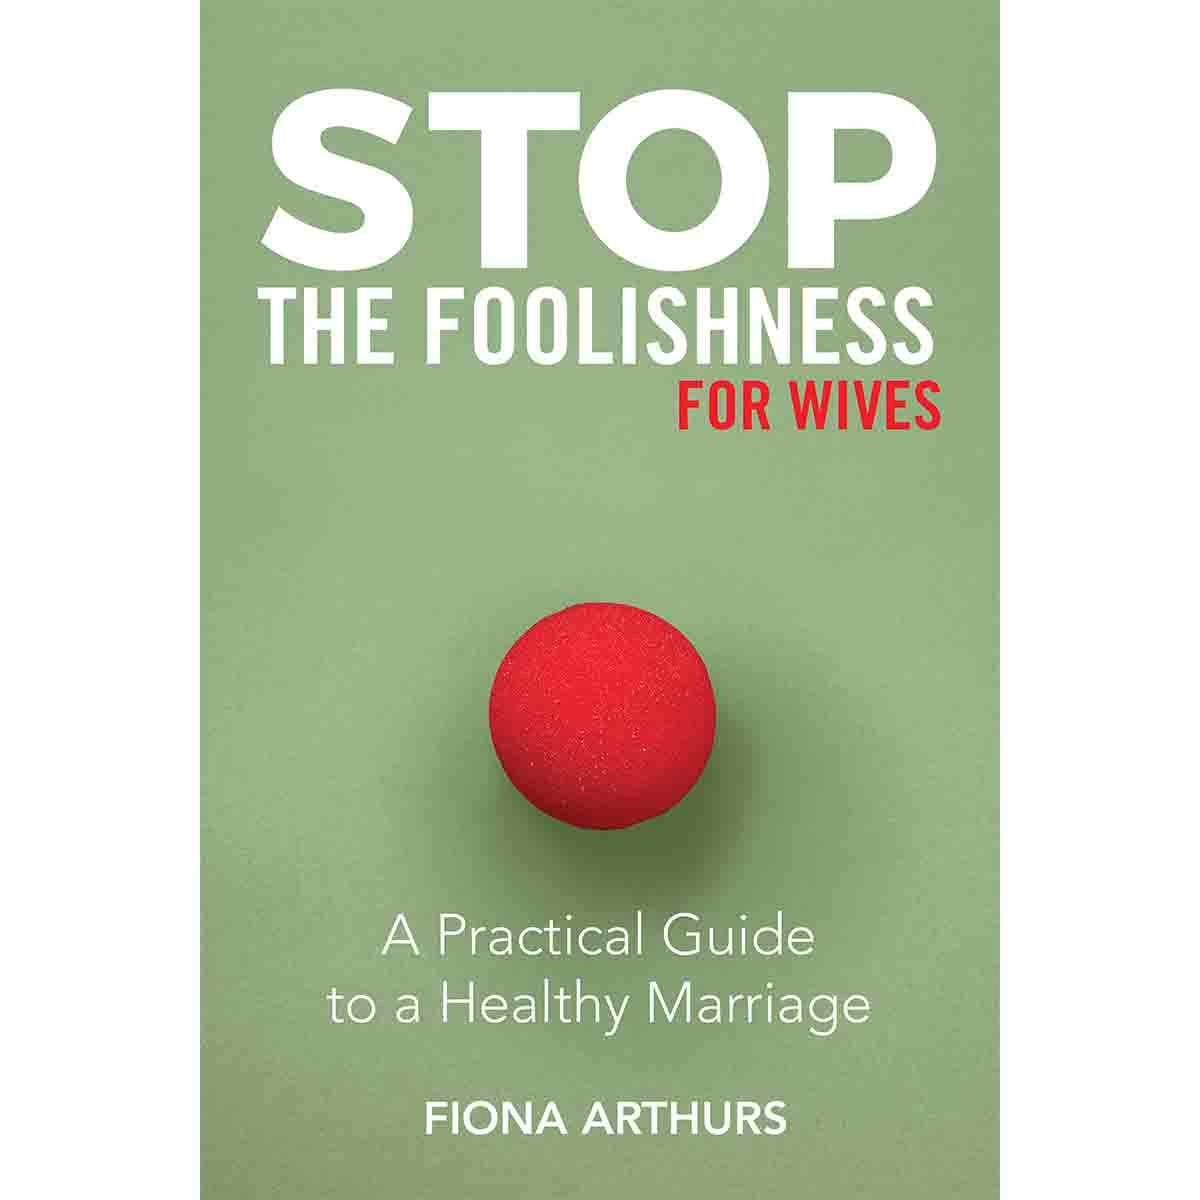 Stop the Foolishness for Wives: A Practical Guide to a Healthy Marriage